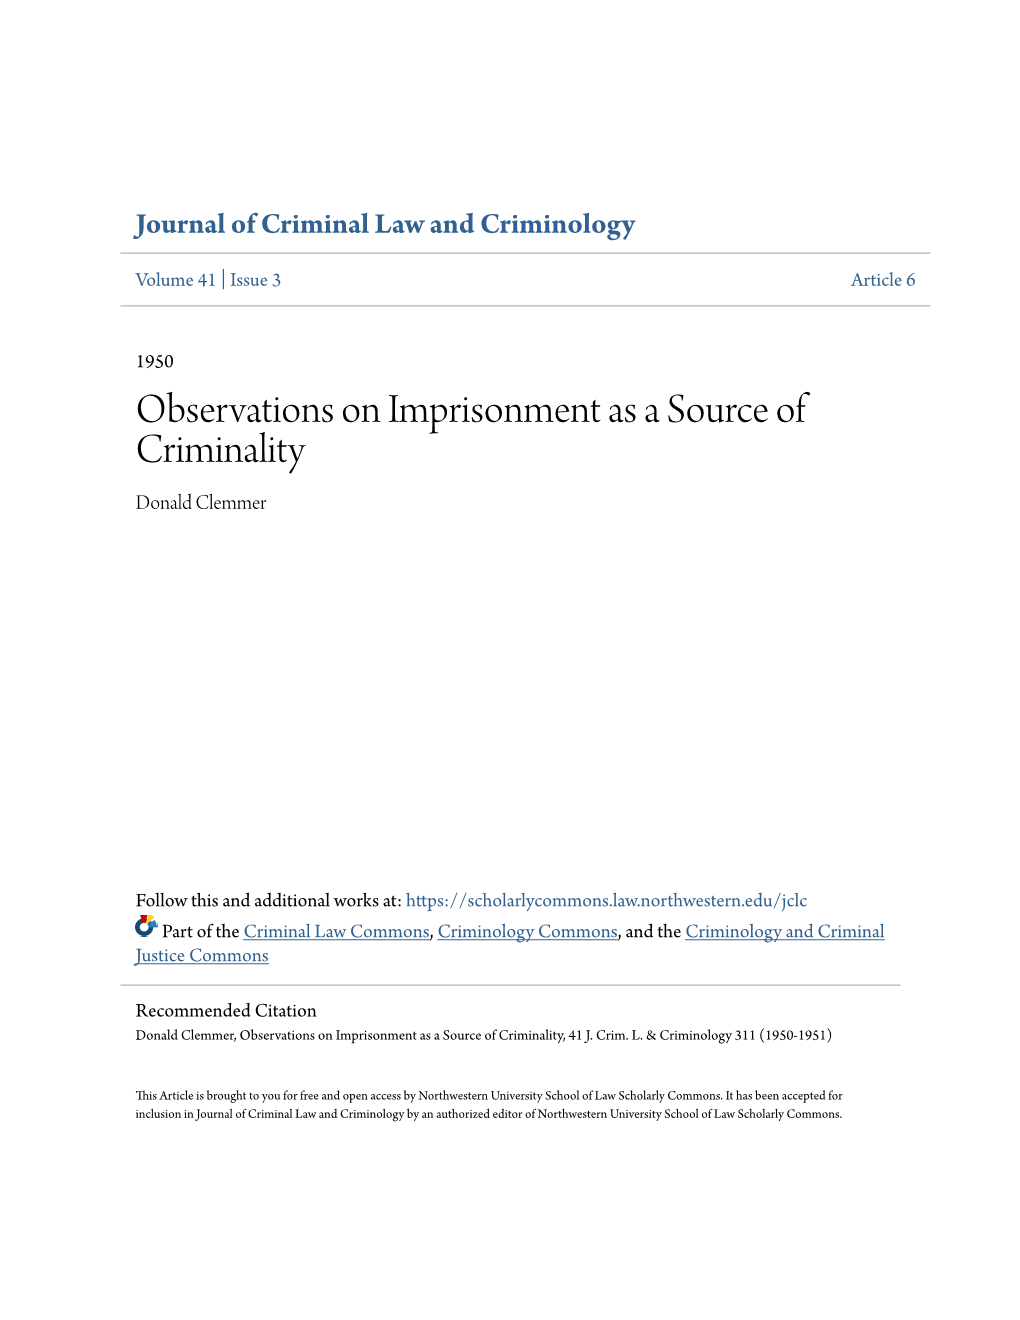 Observations on Imprisonment As a Source of Criminality Donald Clemmer